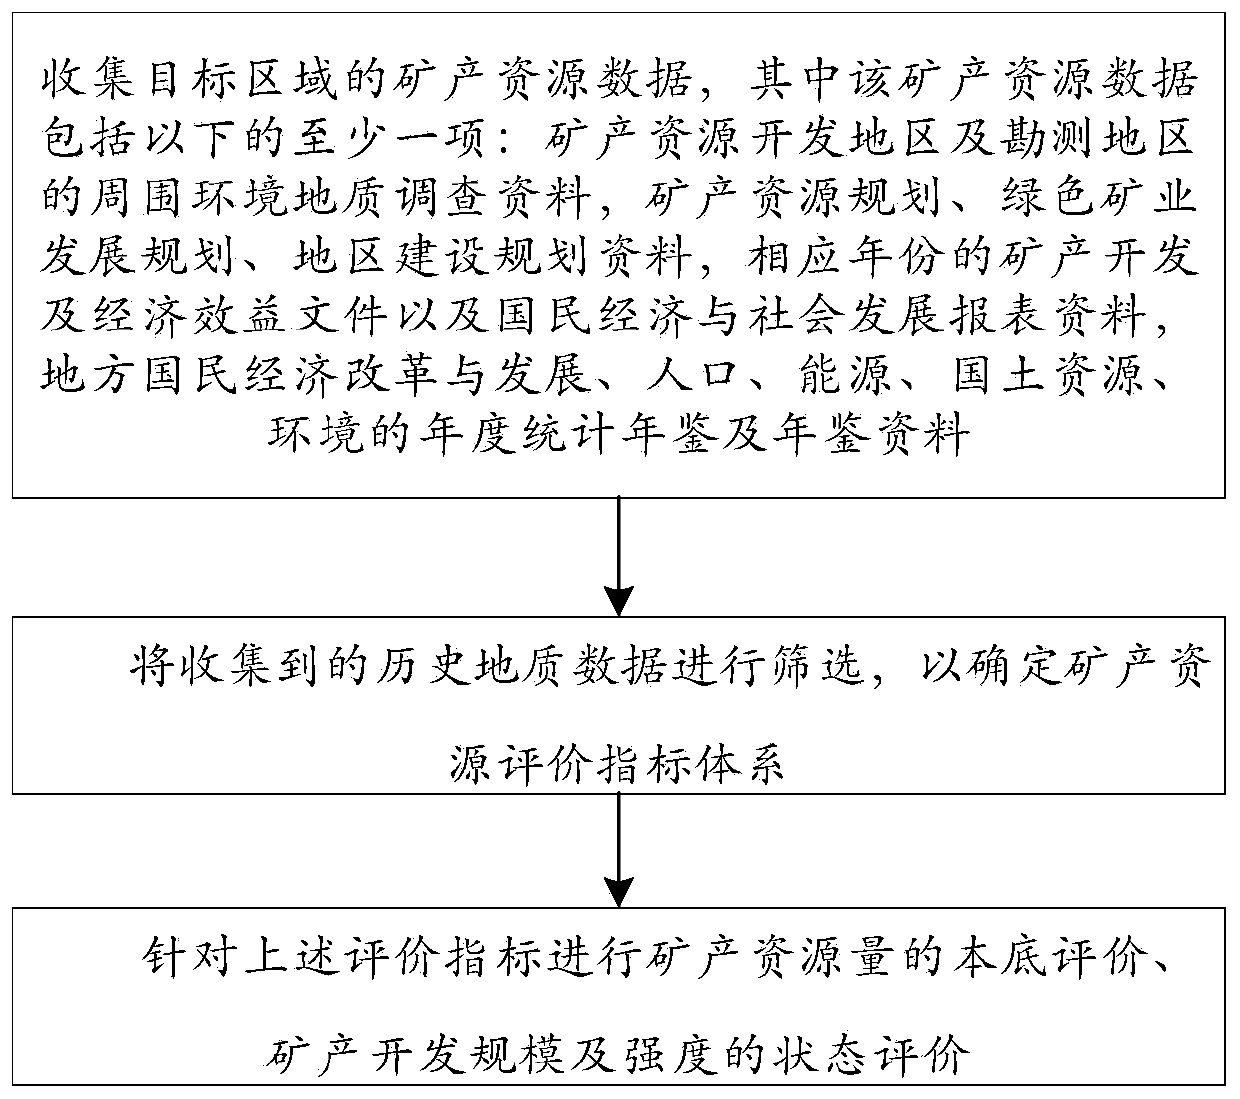 Mineral resource evaluation method suitable for ecological regions